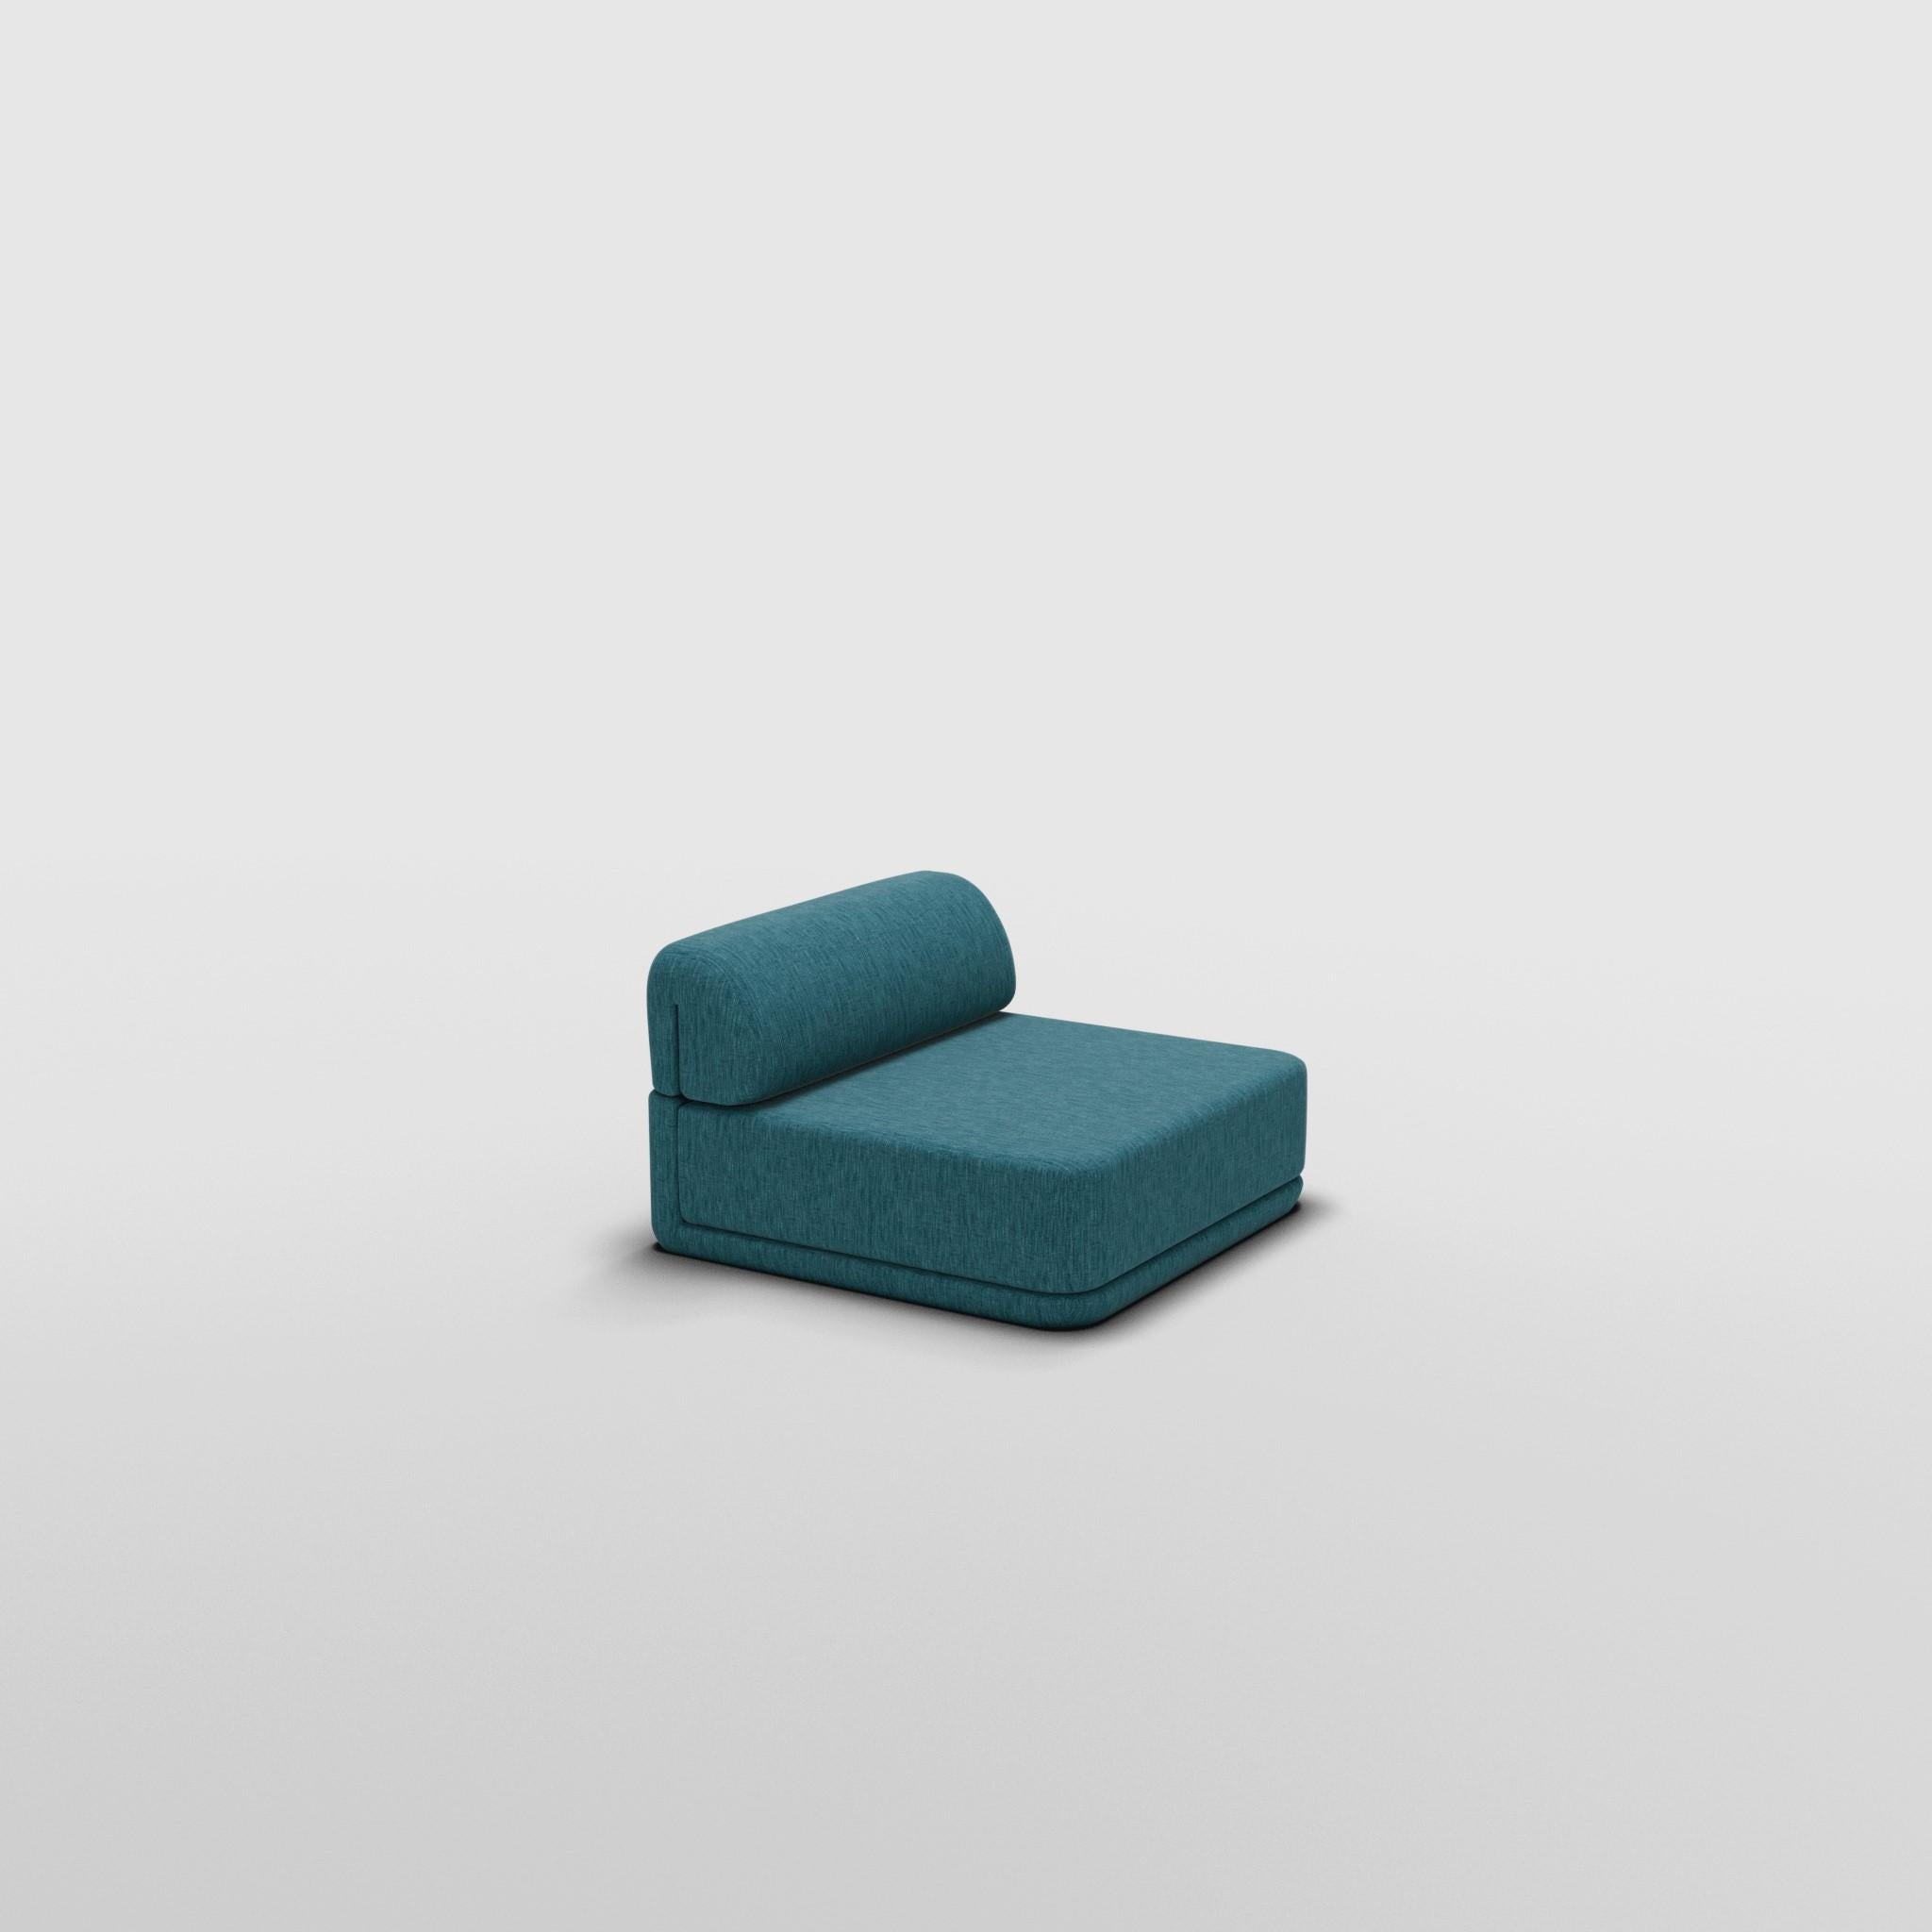 Cube Lounge Seat - Inspired by 70s Italian Luxury Furniture

Discover The Cube Sofa, where art meets adaptability. Its sculptural design and customizable comfort create endless possibilities for your living space. Make a statement, elevate your